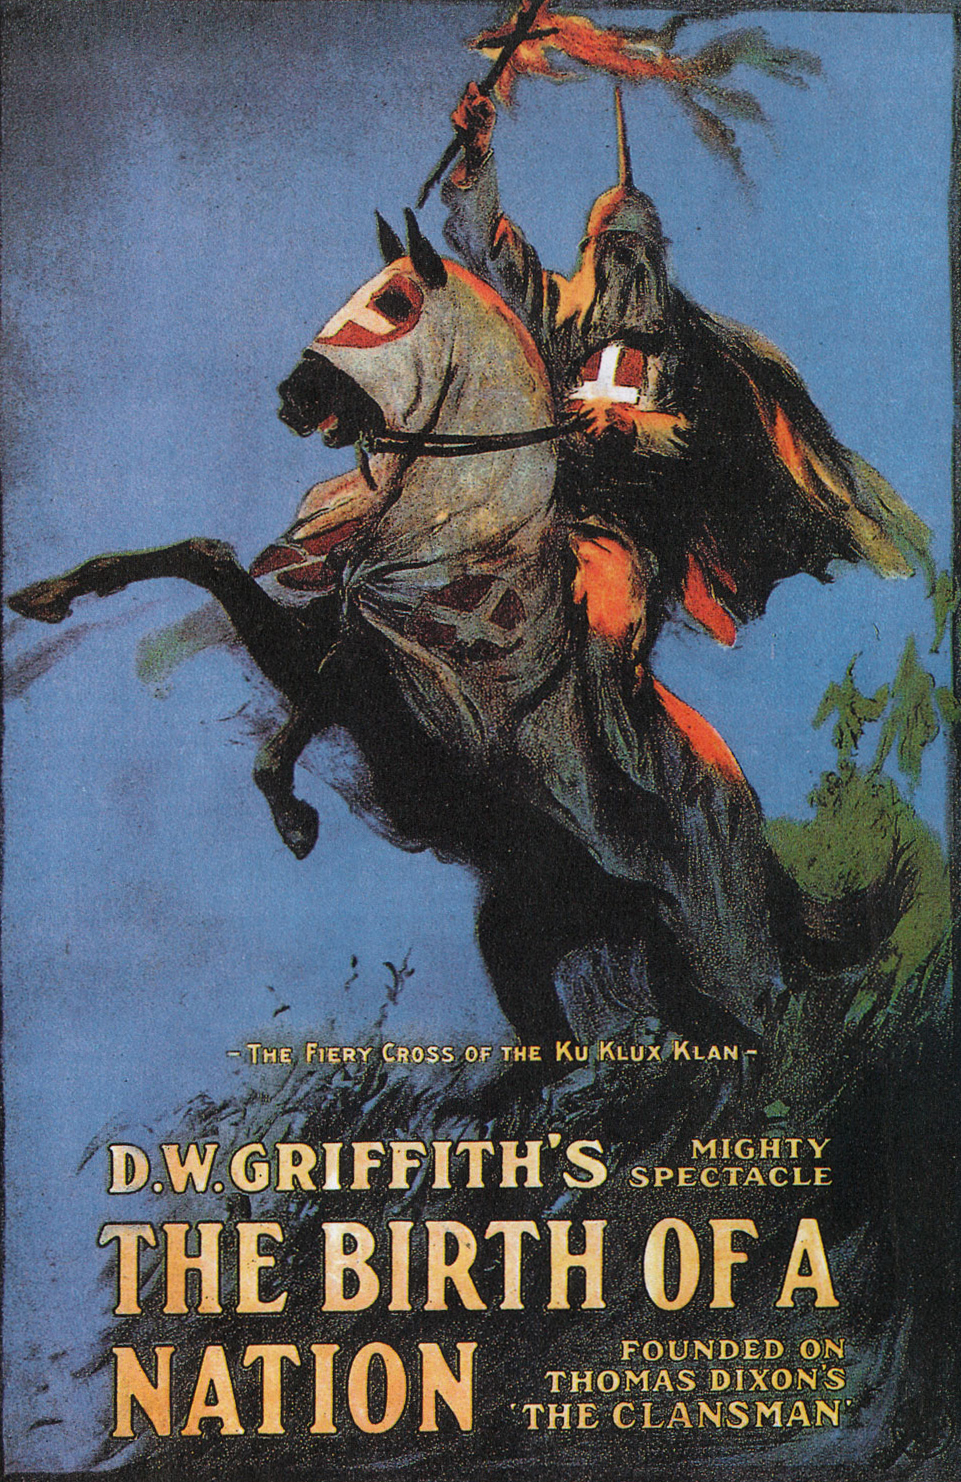 The original 1915 theatrical poster to D.W. Griffith's The Birth Of A Nation (1915), David W. Griffith Corp.